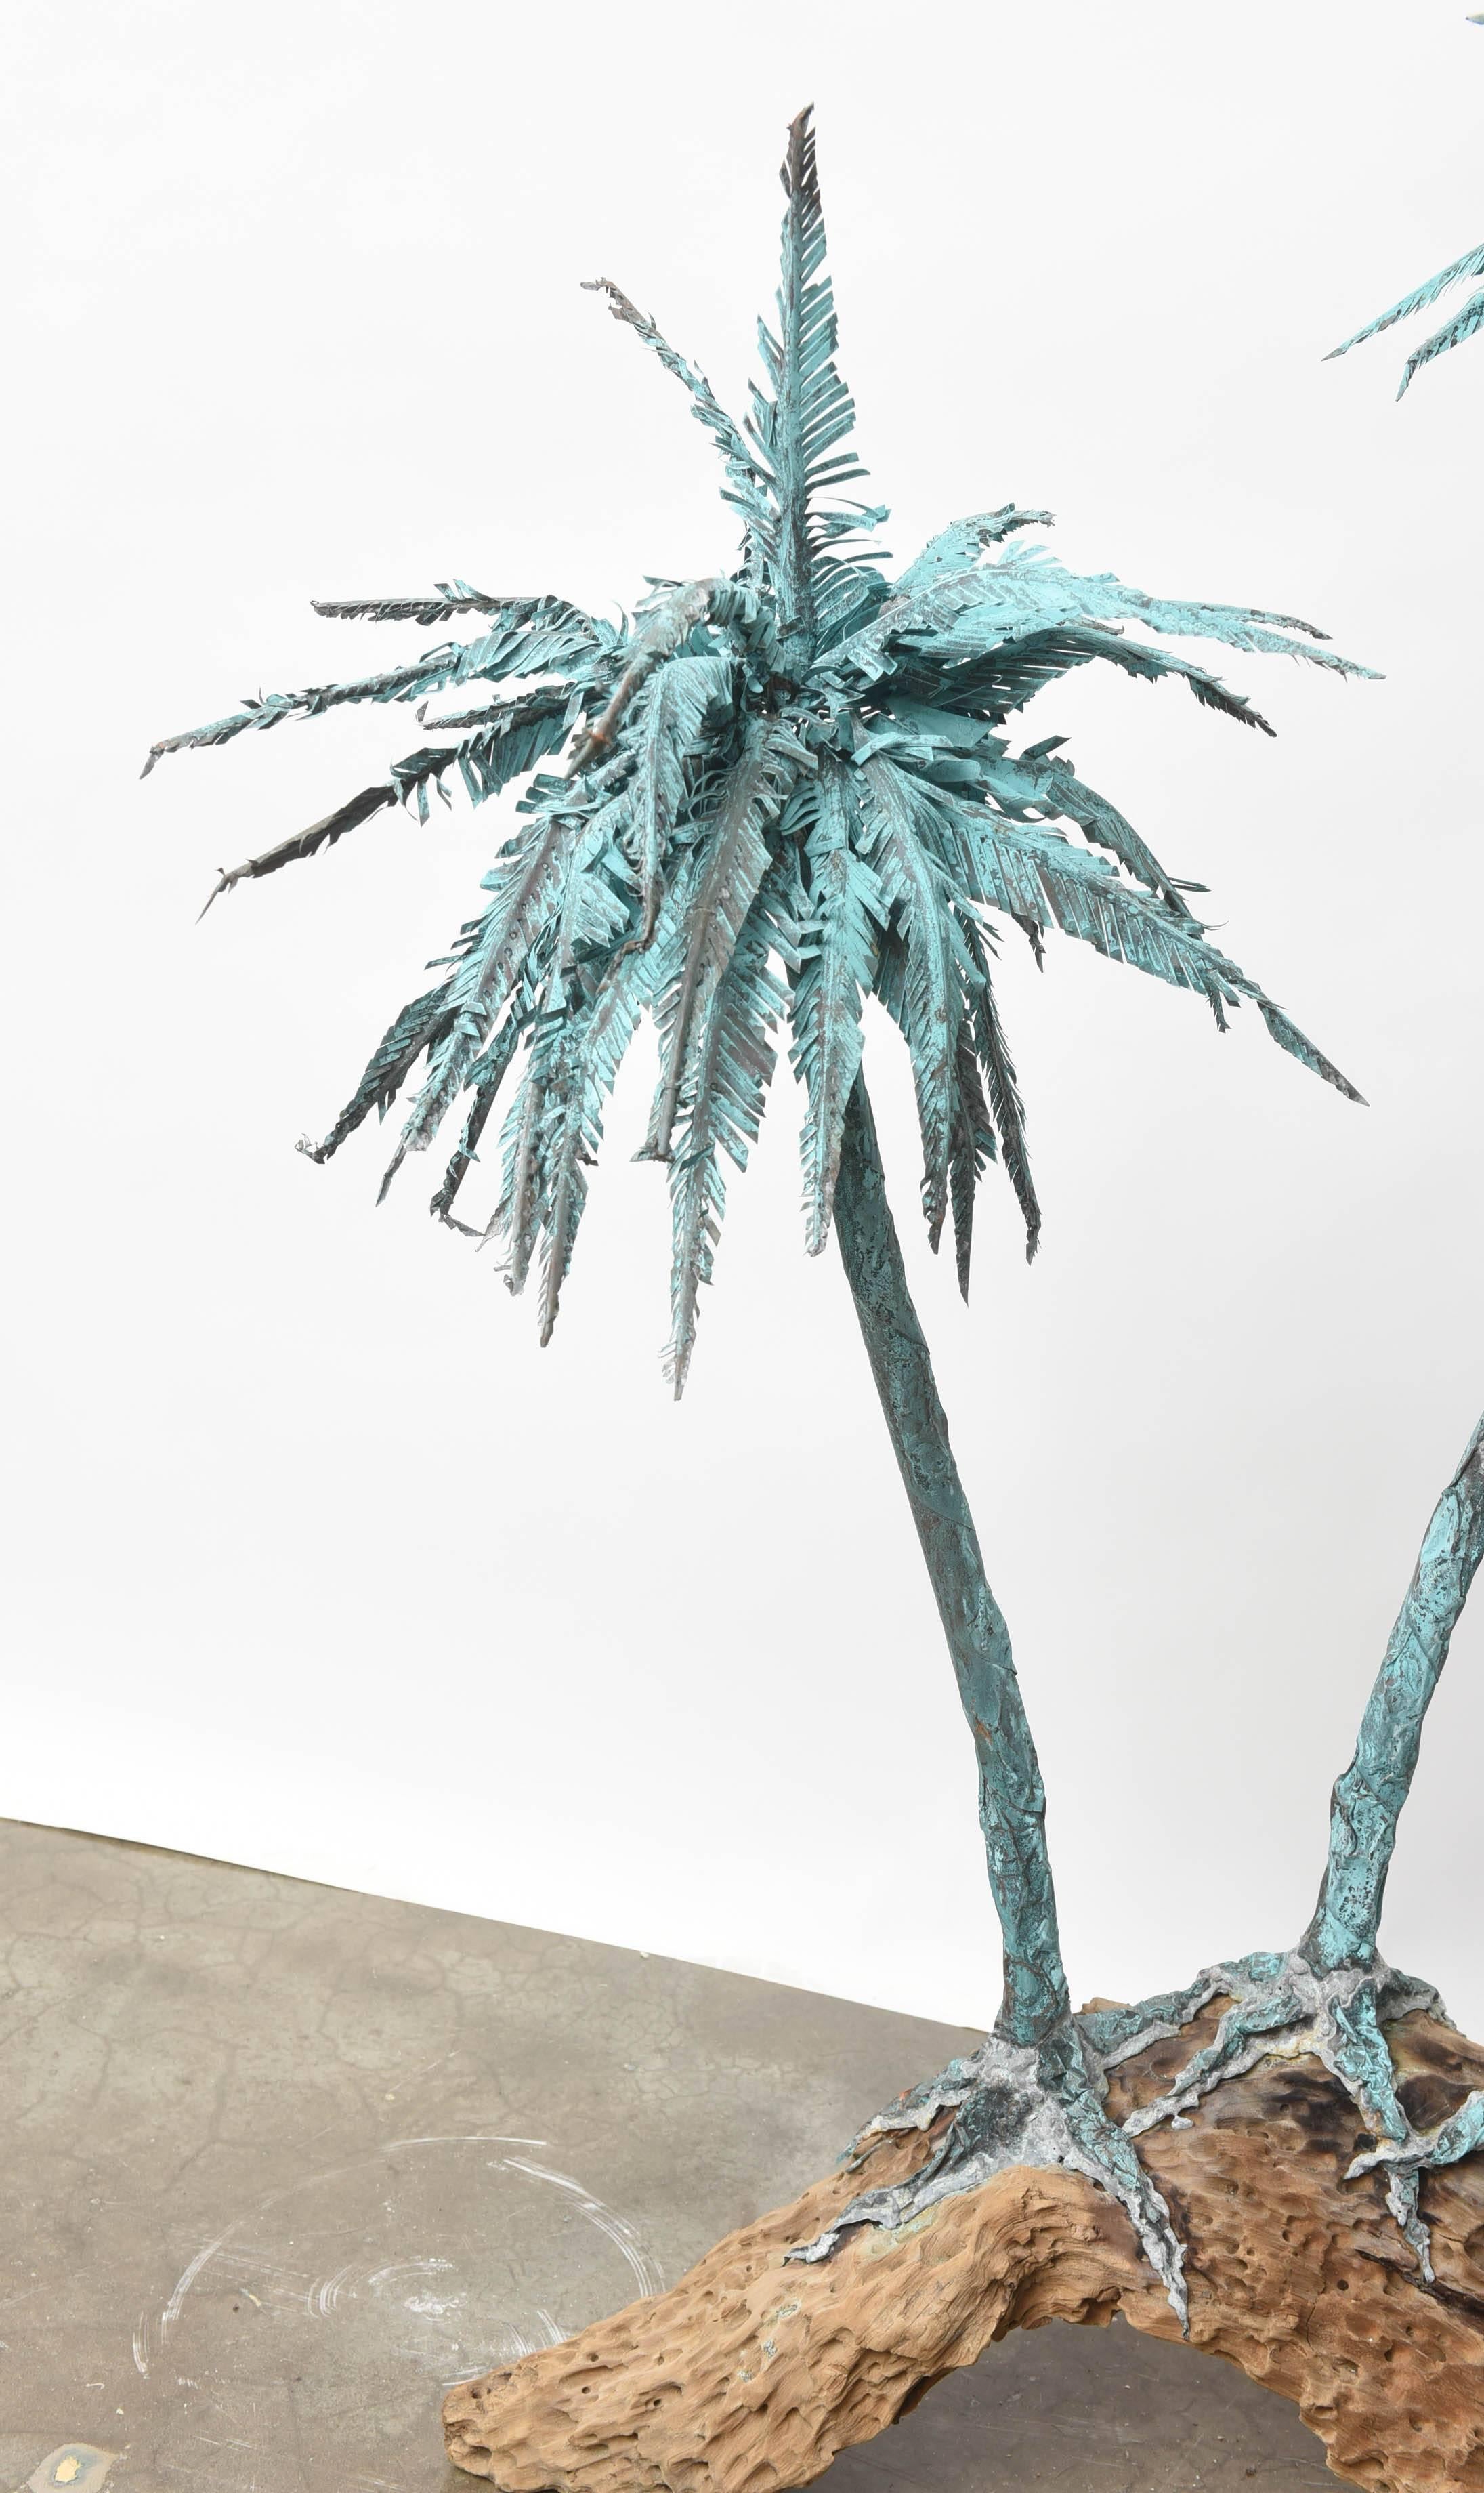 Wonderful and whimsical patinated metal palm trees on driftwood base, in Brutalist style. Piece is large and dramatic at just over 4 feet tall and 38